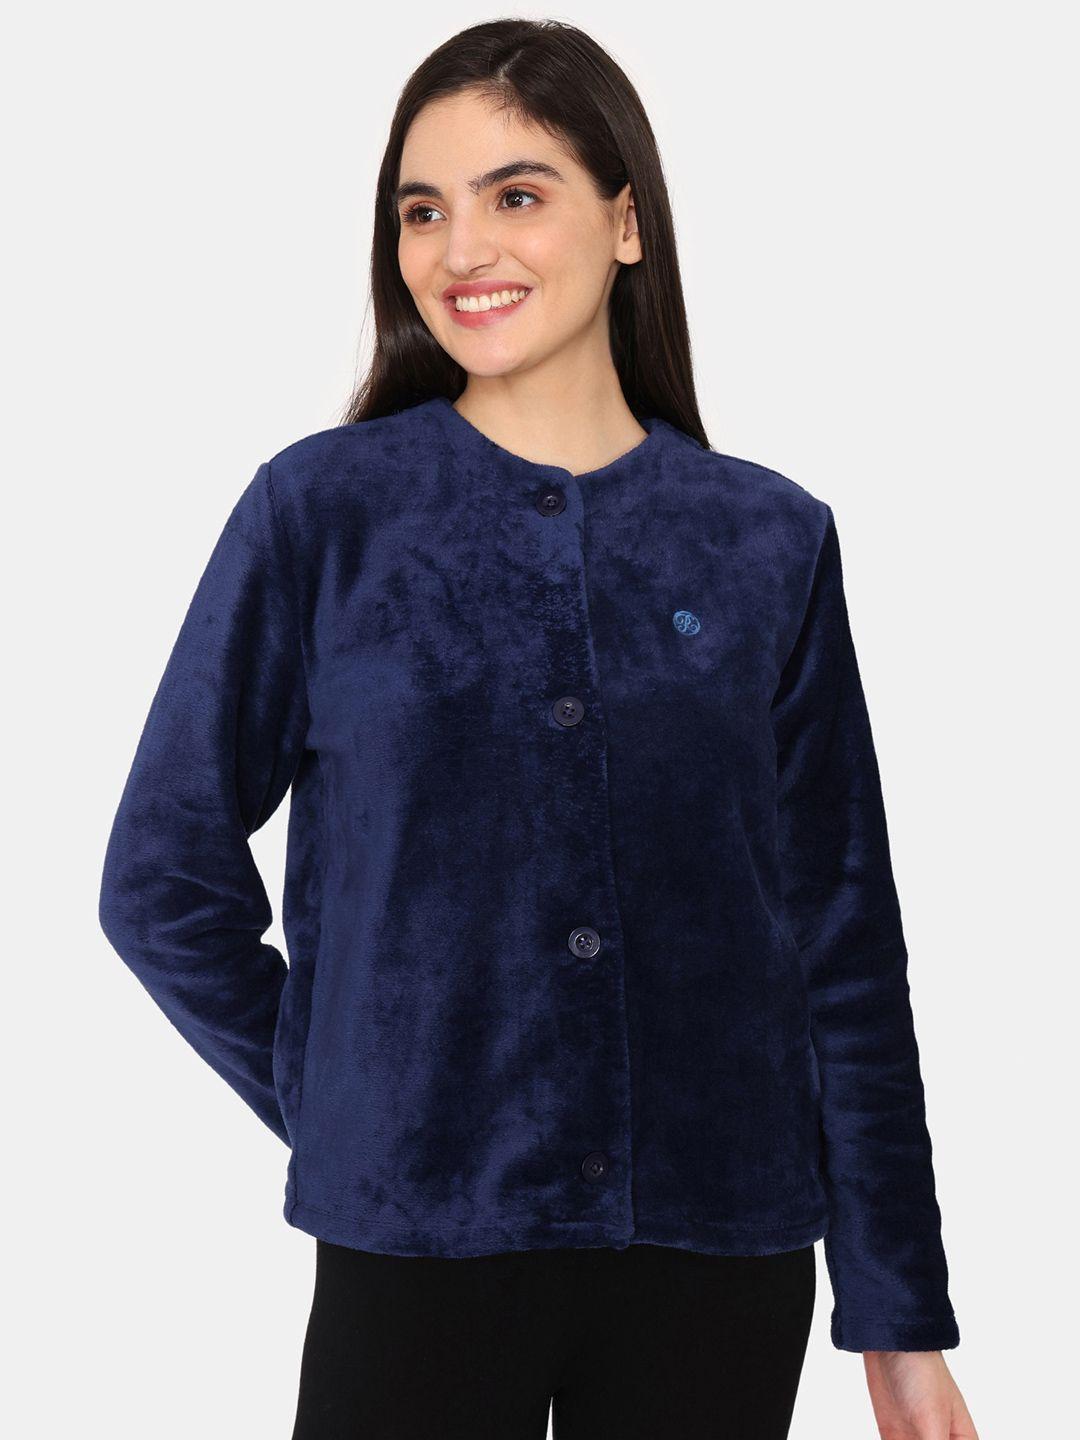 rosaline by zivame round neck lounge shirt style top